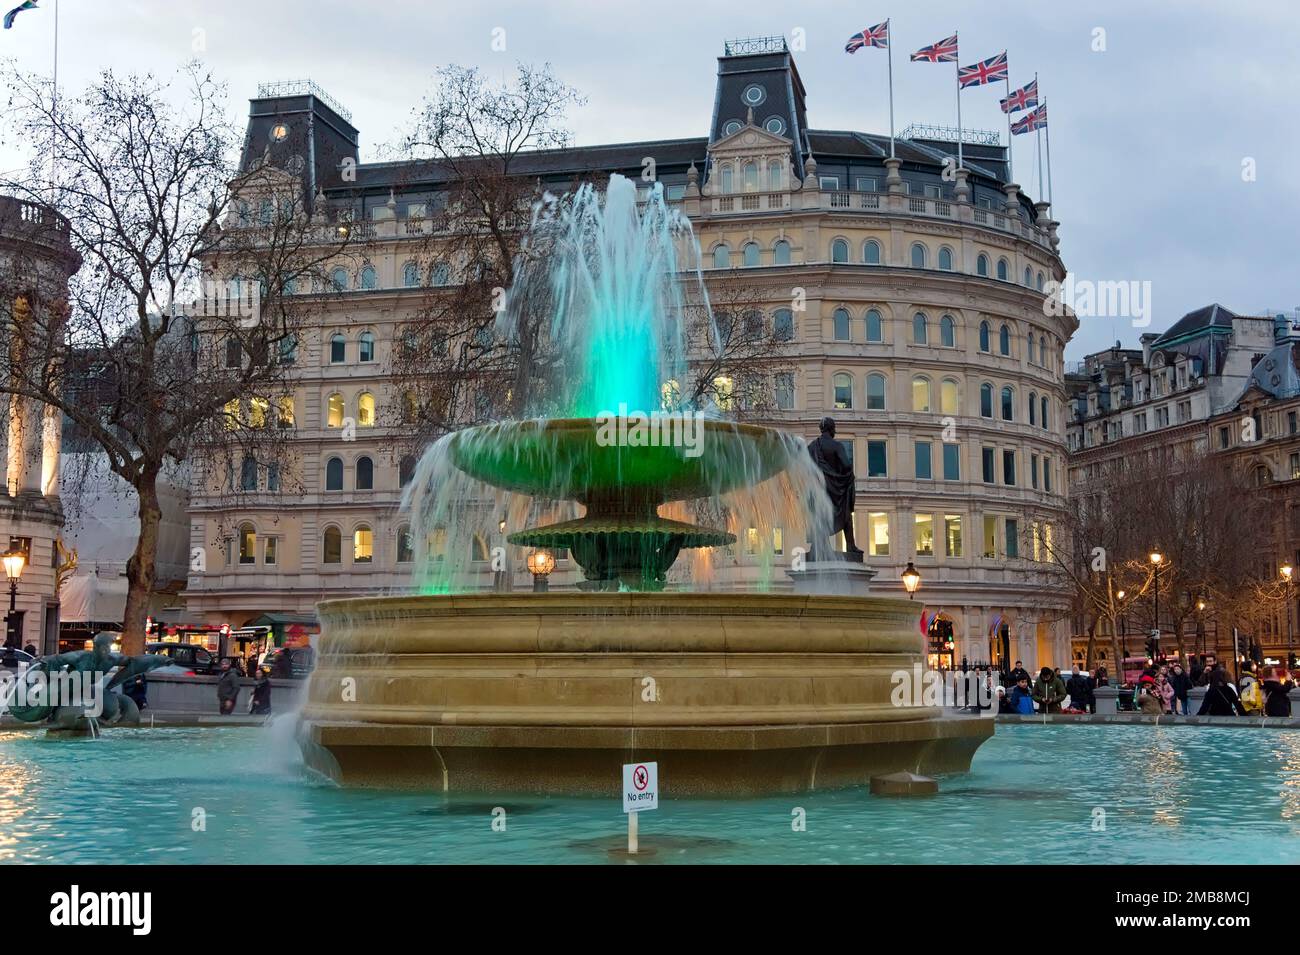 One of the famous illuminated water fountains at Trafalgar Square, Stock Photo